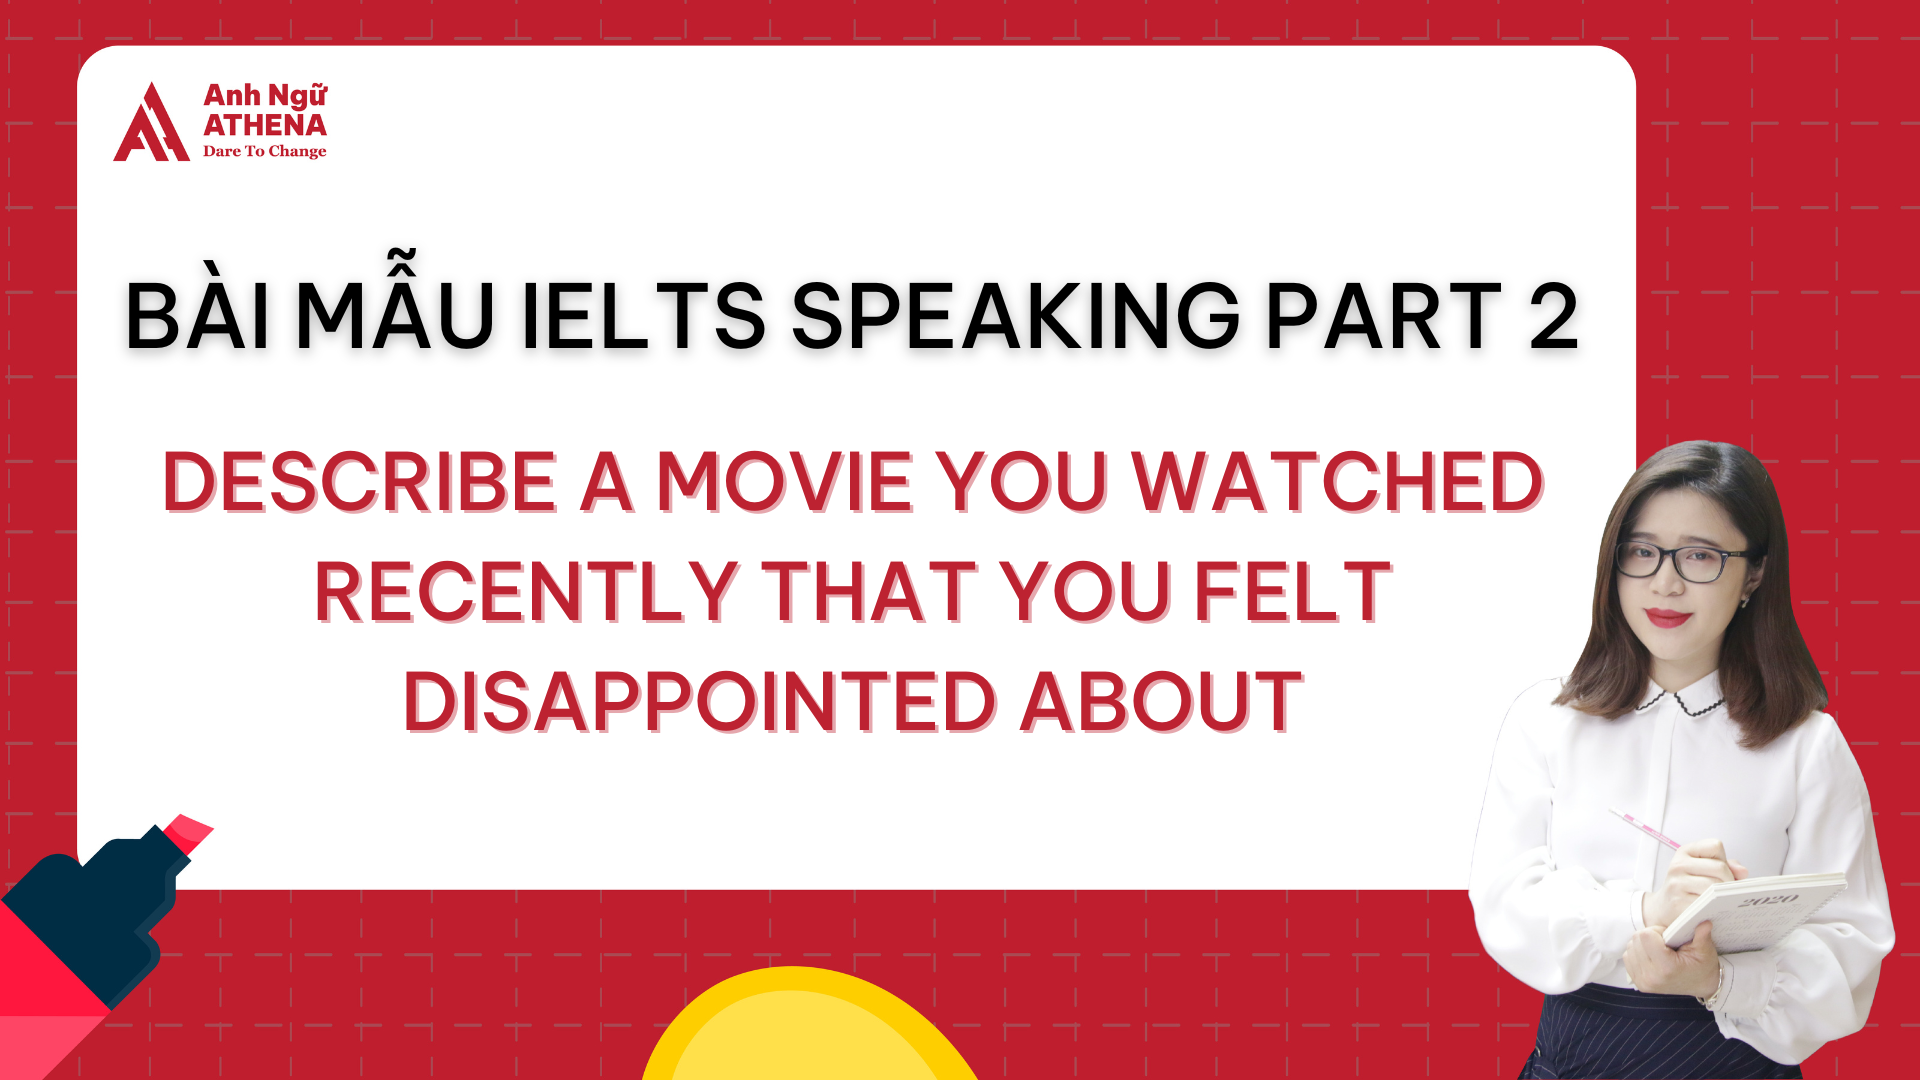 Bài mẫu IELTS Speaking Part 2 - Topic: Describe a movie you watched recently that you felt disappointed about